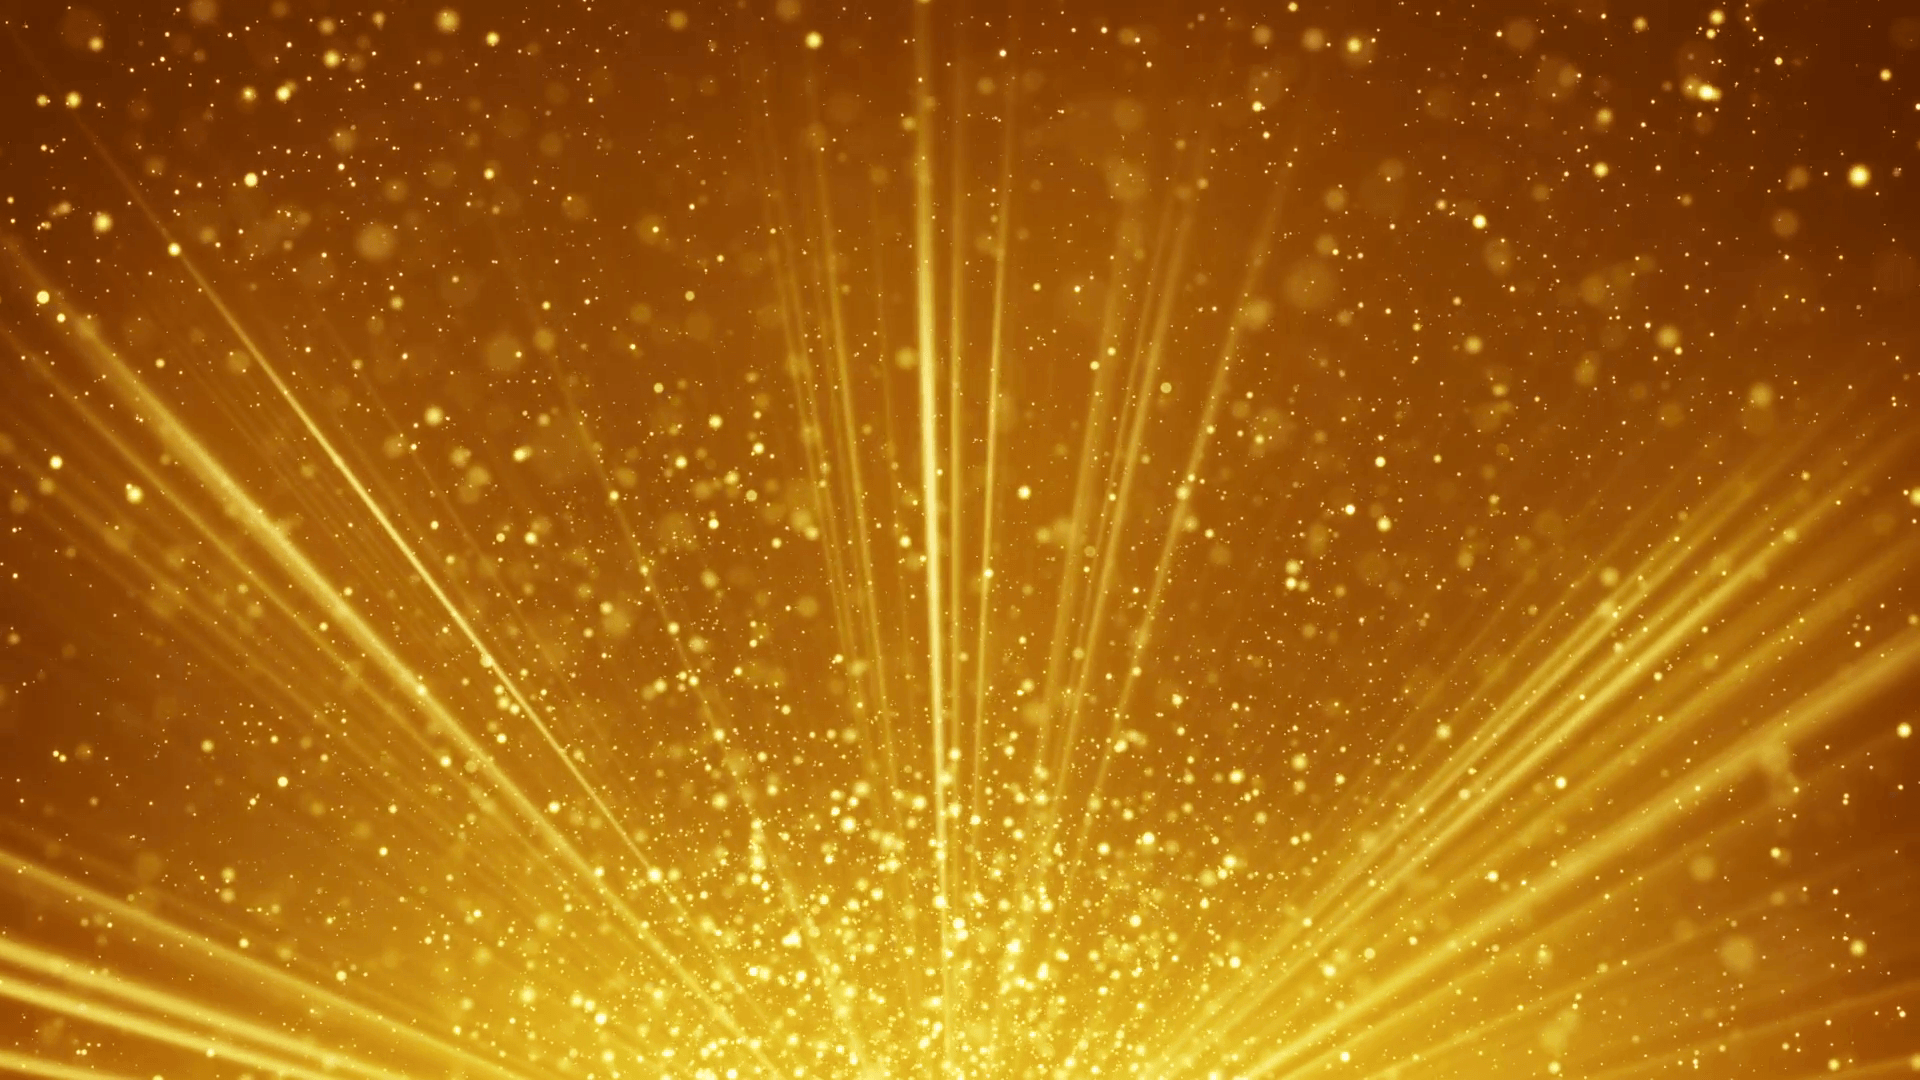 Light Wallpapers - Free Light Gold Backgrounds